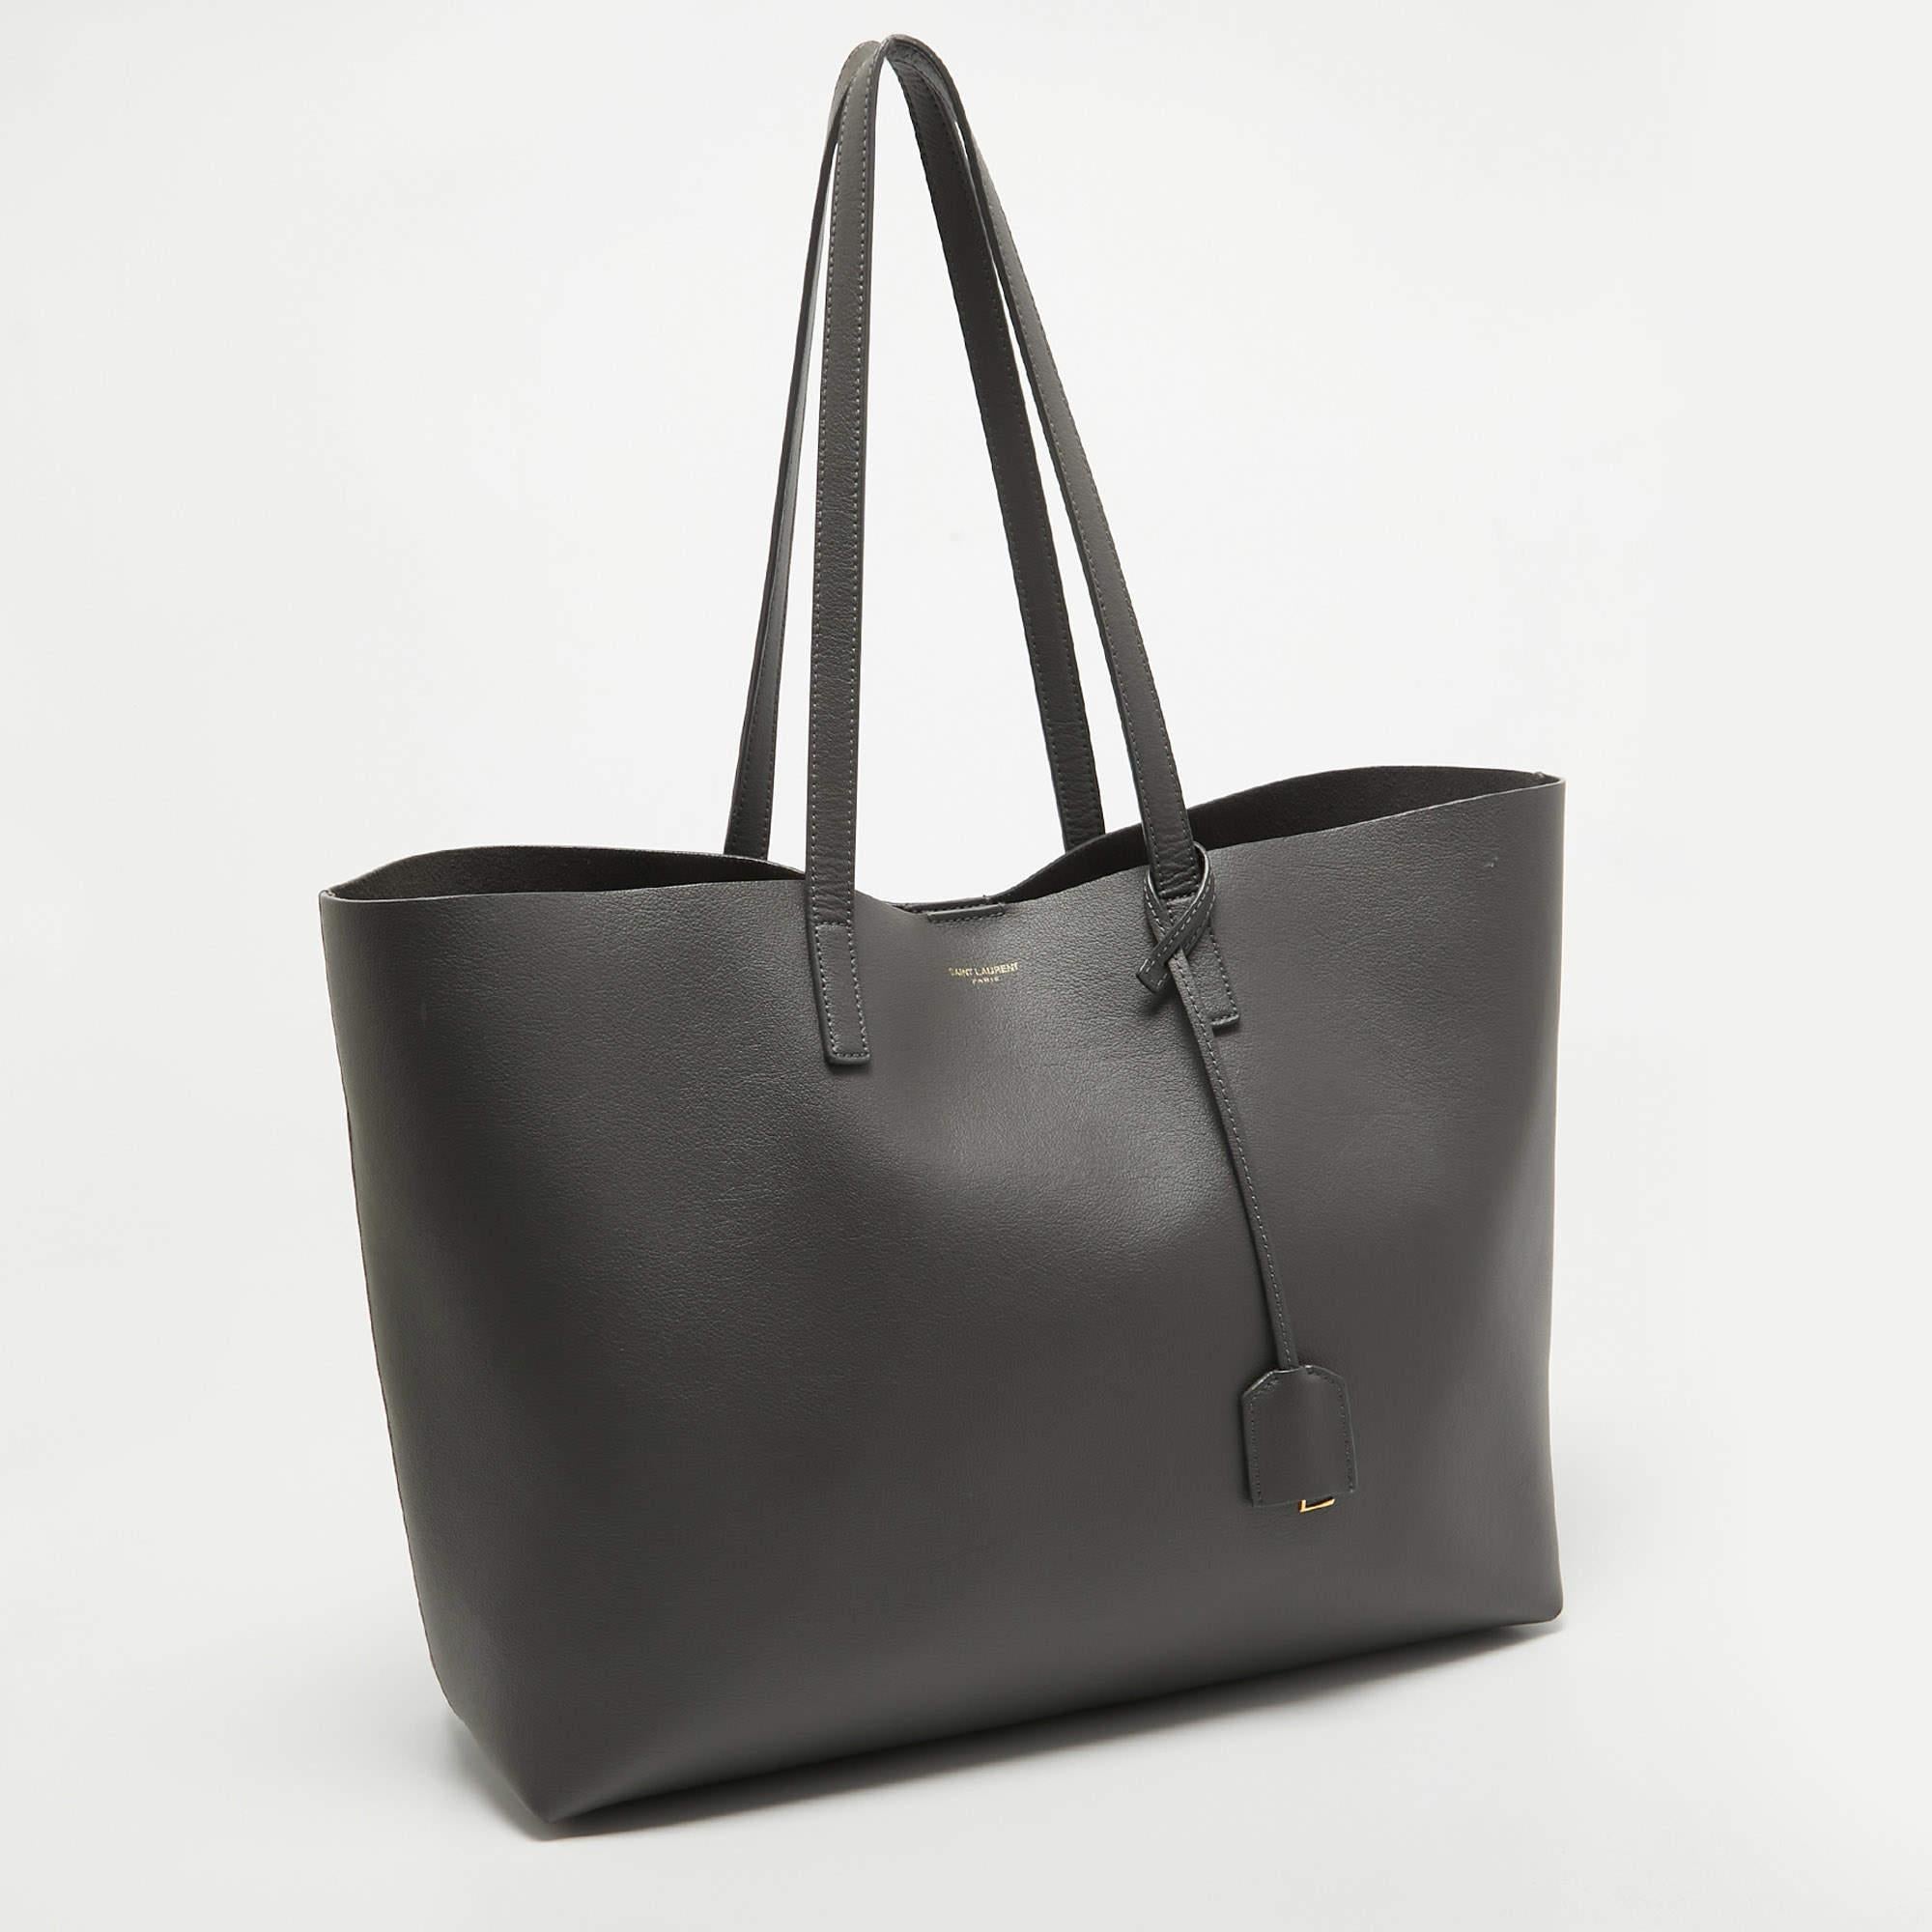 Created from high-quality materials, this tote is enriched with functional and classic elements. It can be carried around conveniently, and its interior is perfectly sized to keep your belongings with ease.

Includes: Original Dustbag, Extra Pouch